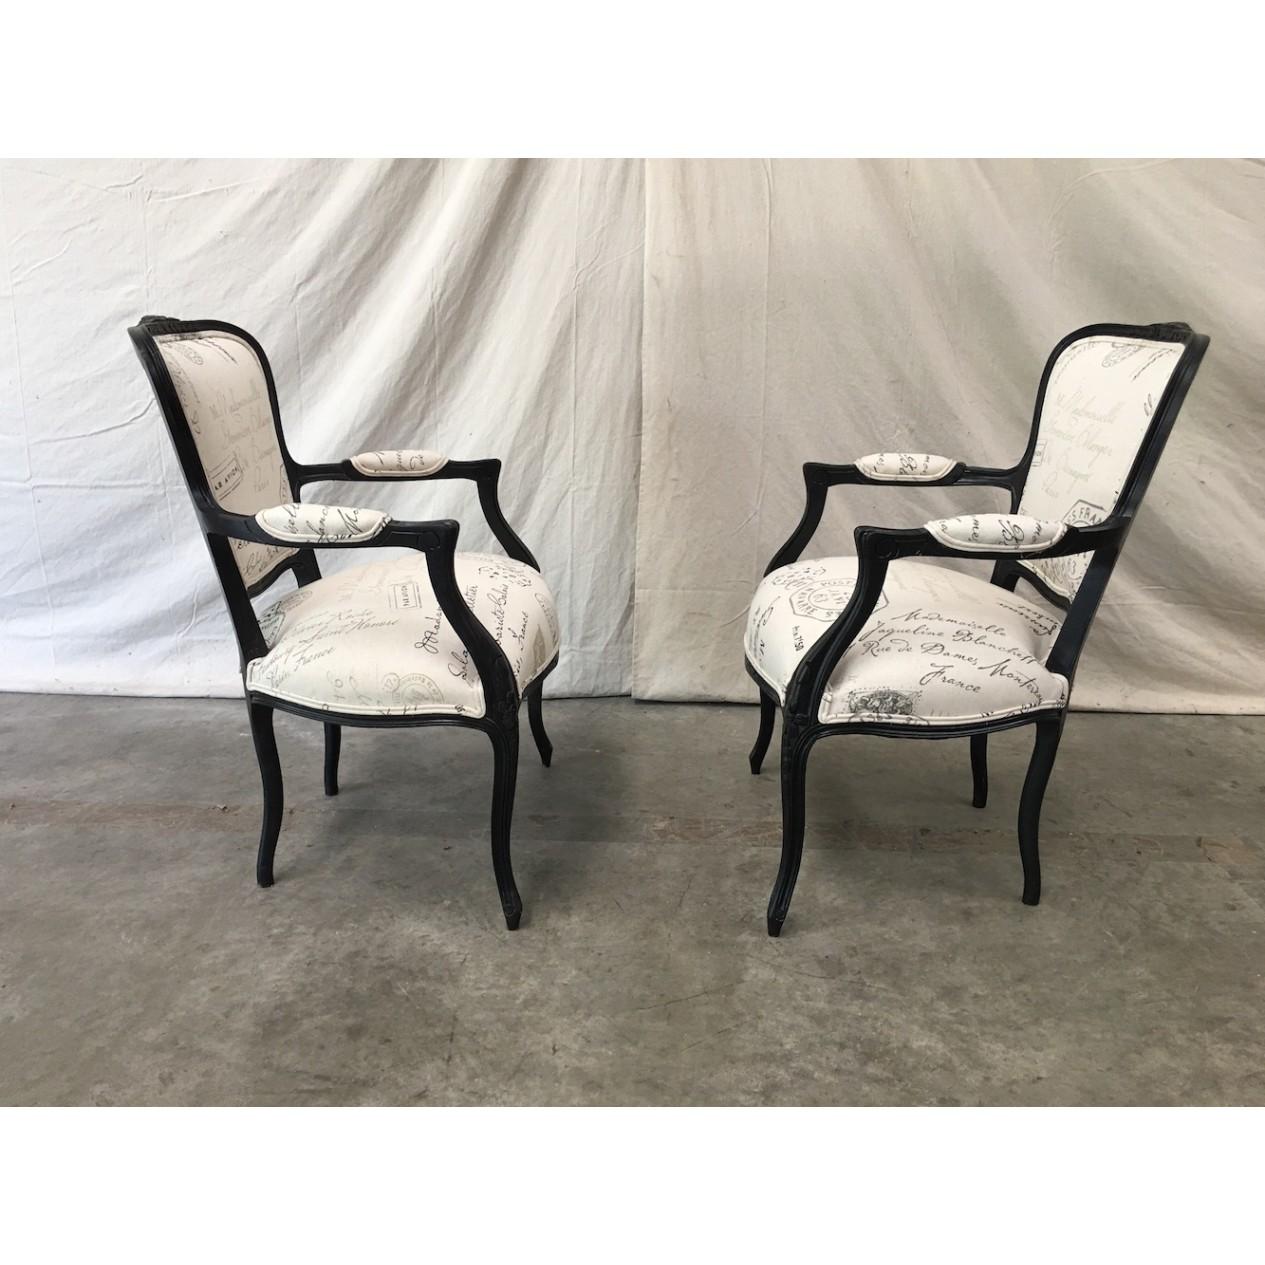 Vintage Style Louis XV Painted Arm Chairs in White Linen